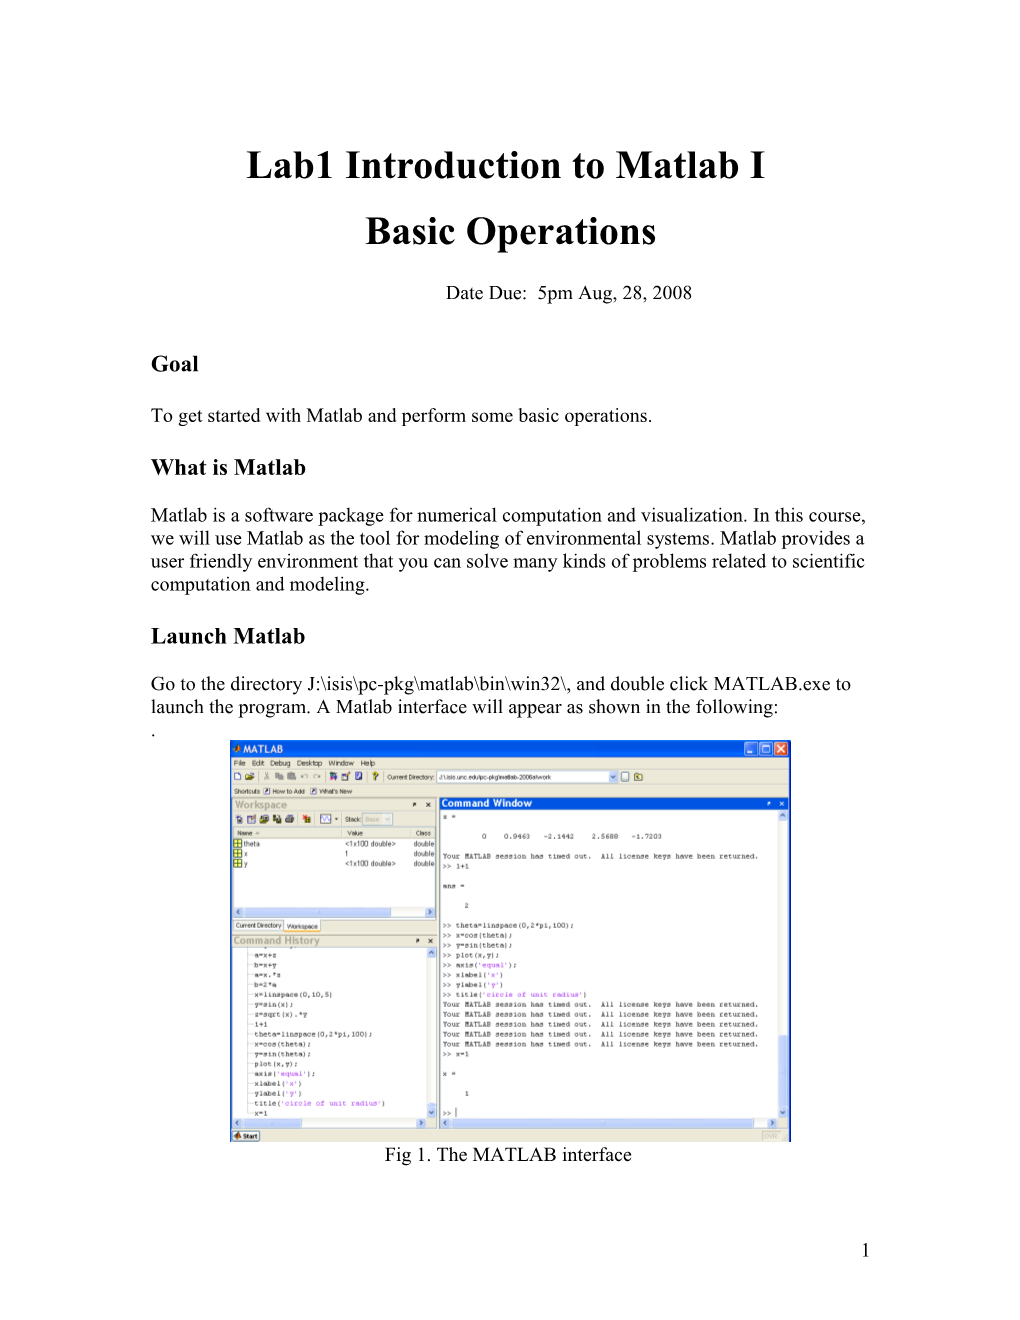 Introduction to Matlab (I)